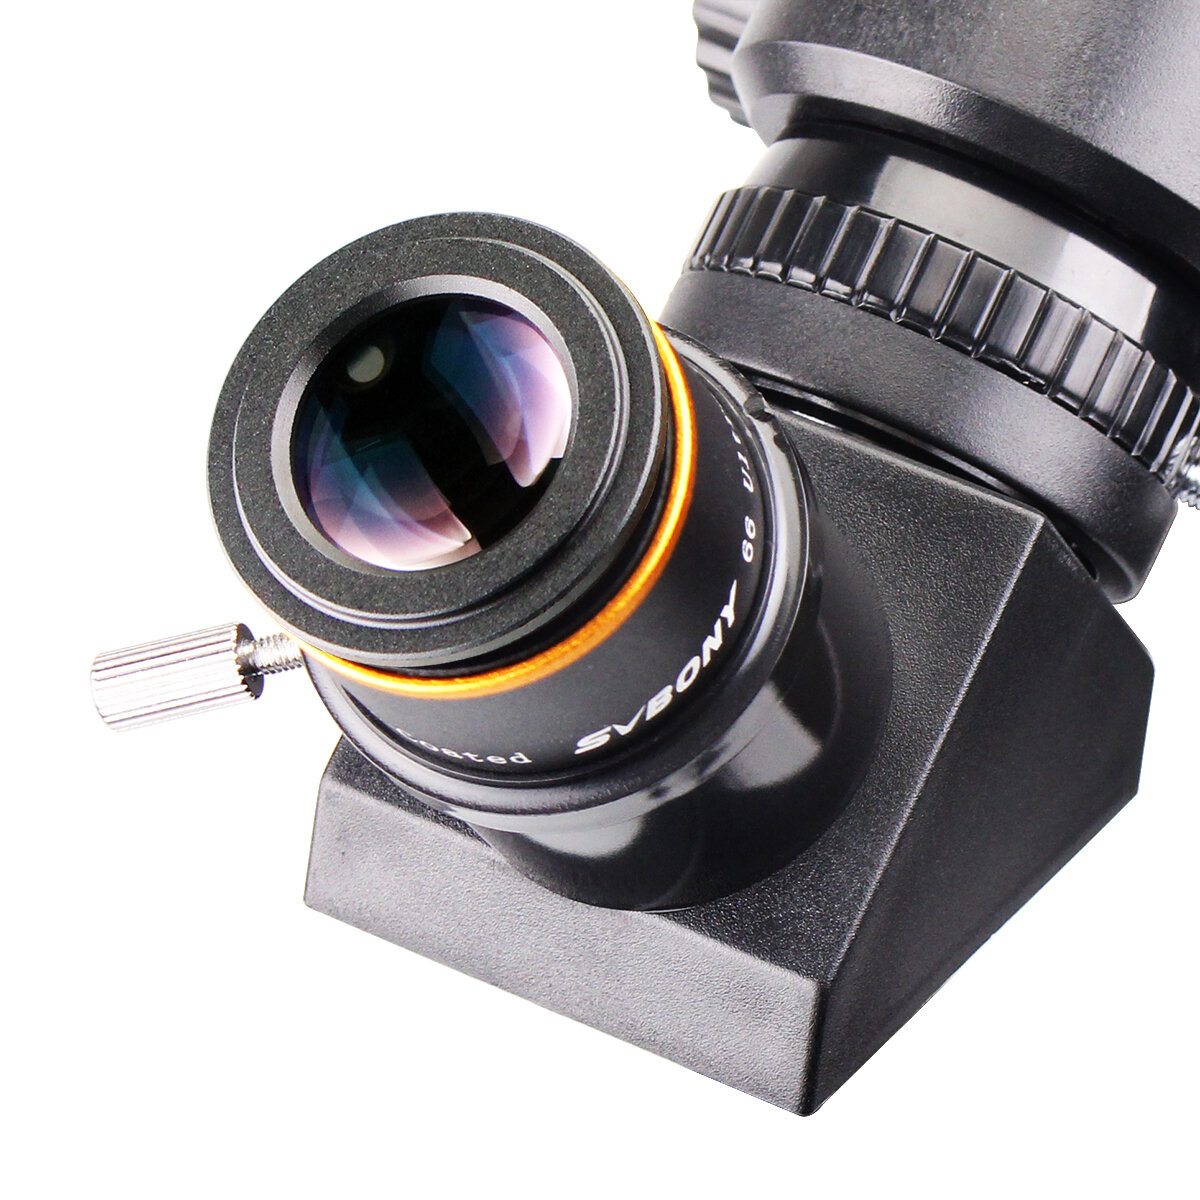 

SVBONY Fully Multi-Coated 1.25" 15mm Ultra Wide Angle Eyepiece for Astronomical Telescope